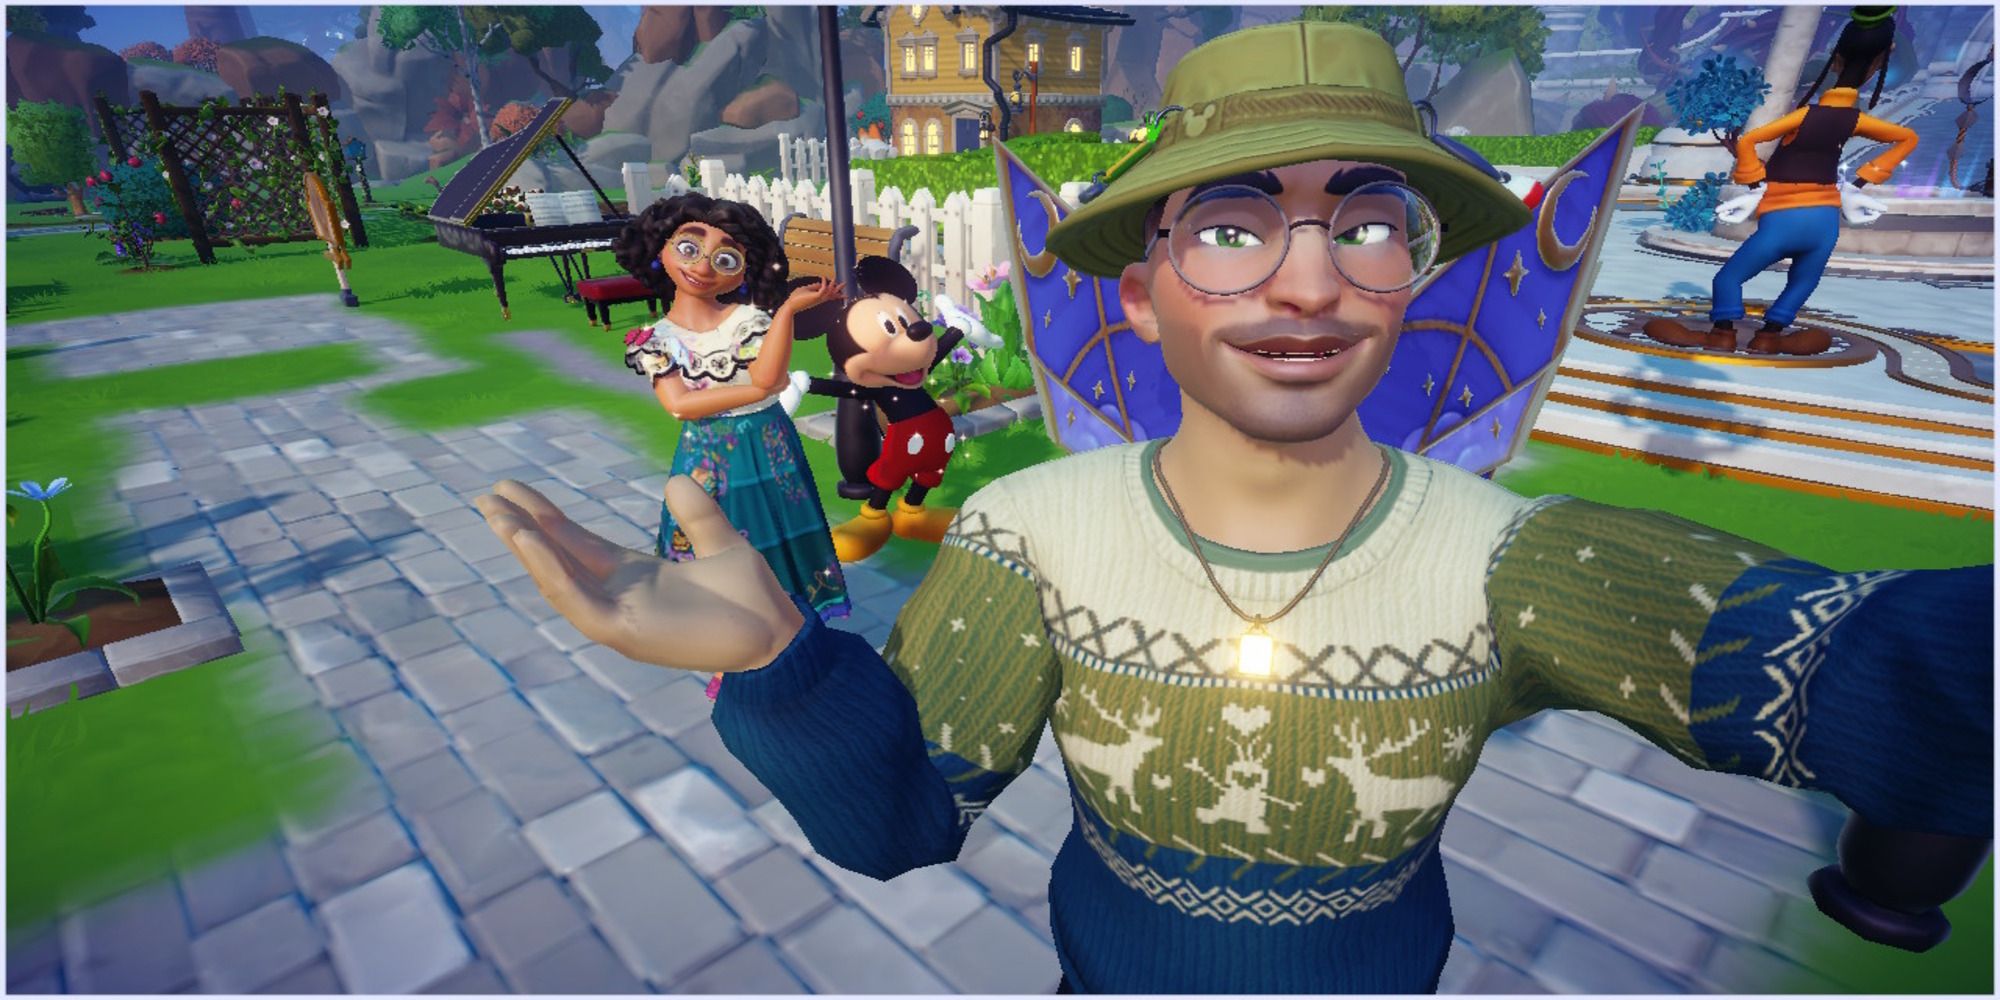 Disney Dreamlight Valley confirms option to remove villagers and